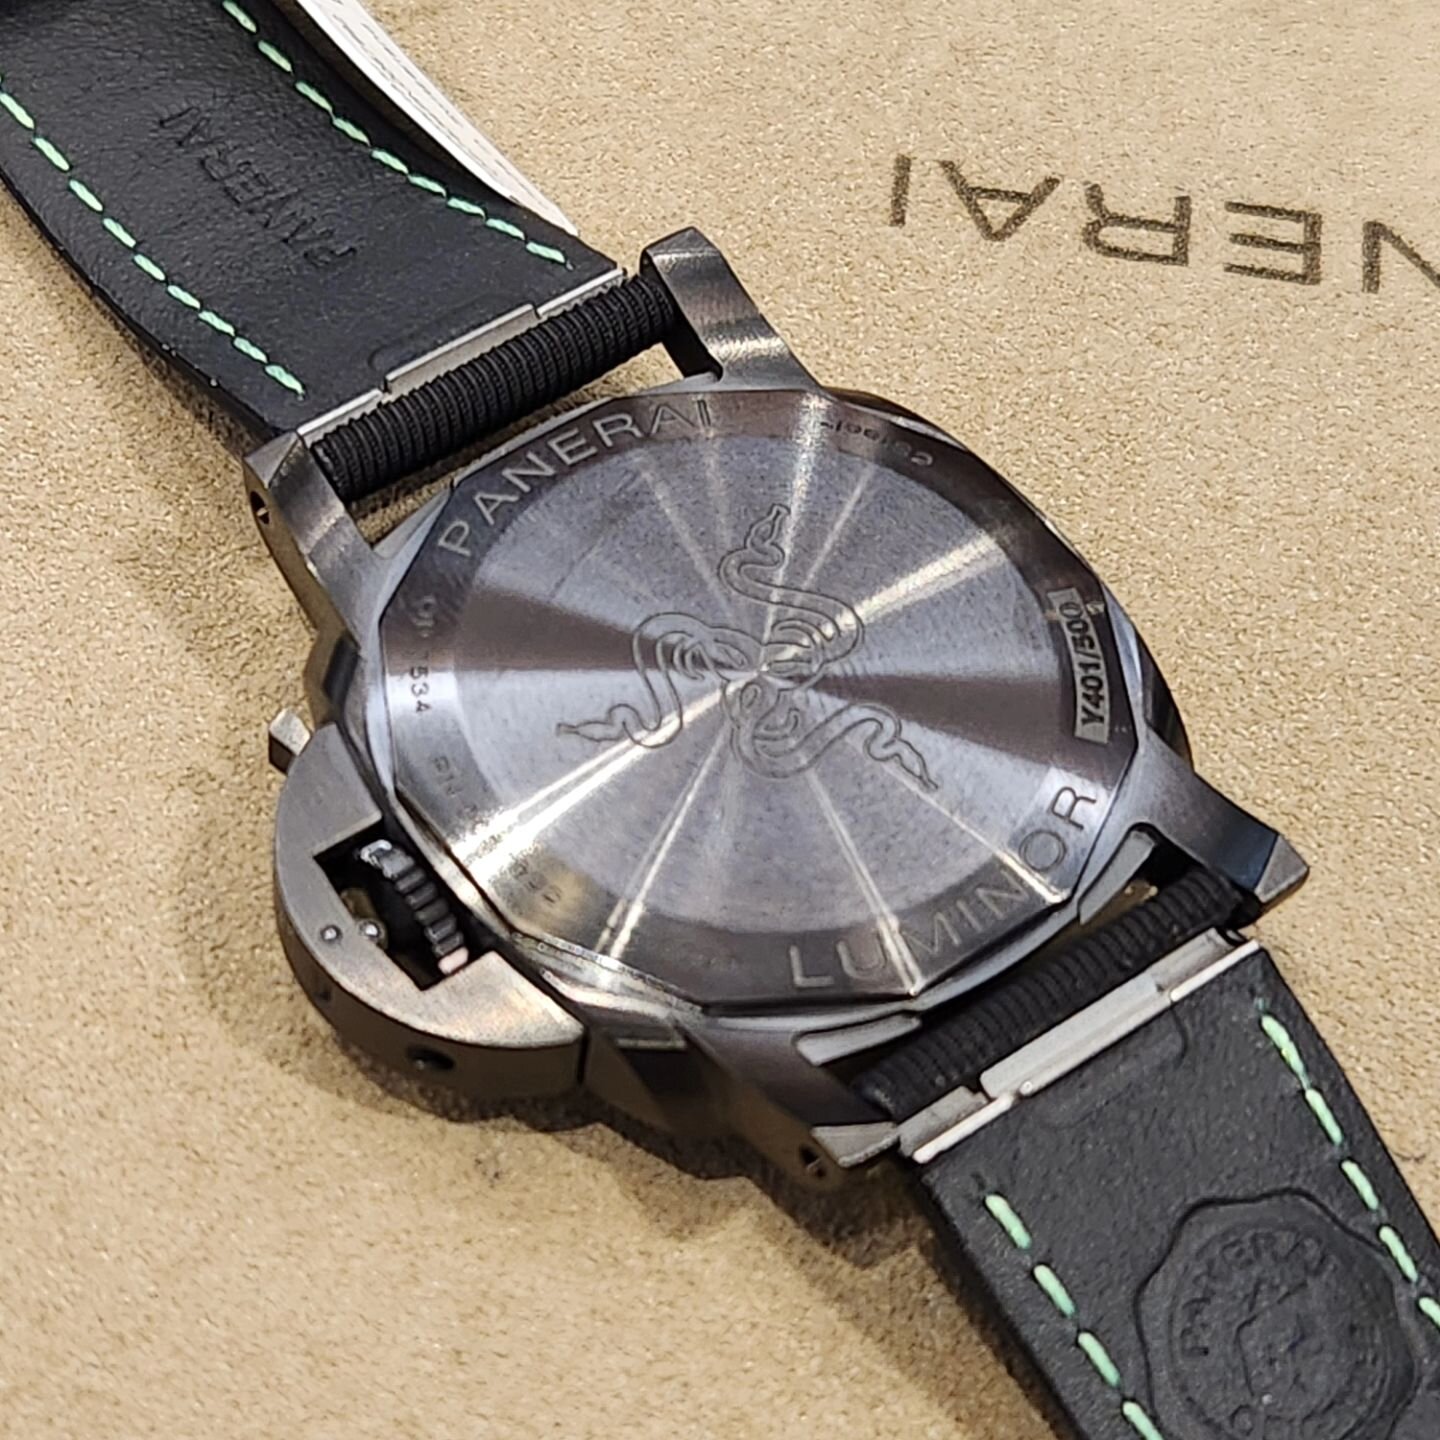 Wow @razer and @panerai collaboration is not what I expected to see when I was looking at some of the models. Have to say, the green looked great on this Luminor.